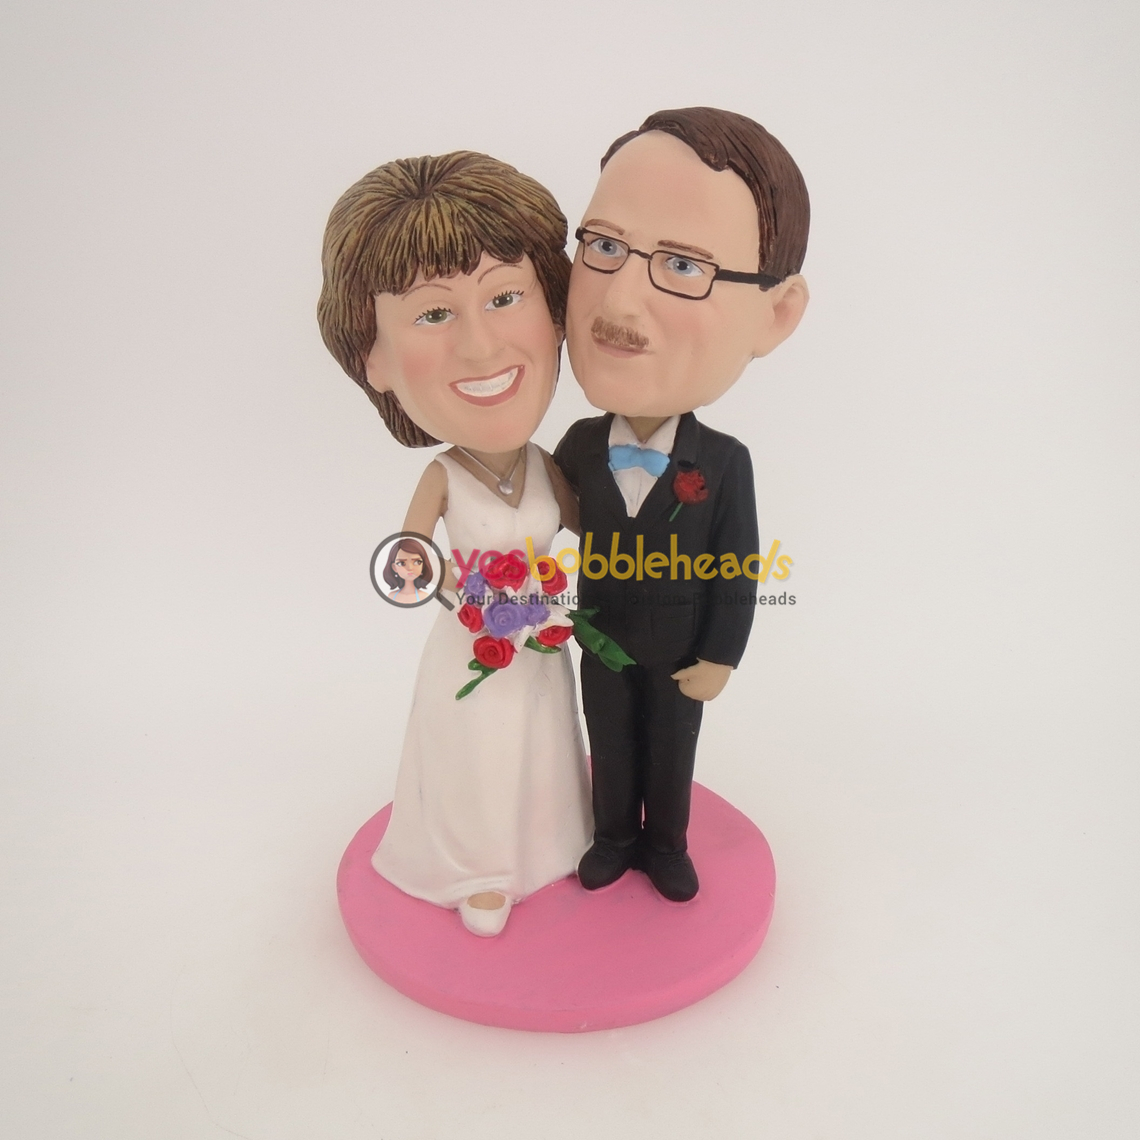 Picture of Custom Bobblehead Doll: Black Suit & White Dressed Arms Crossed Wedding Couple